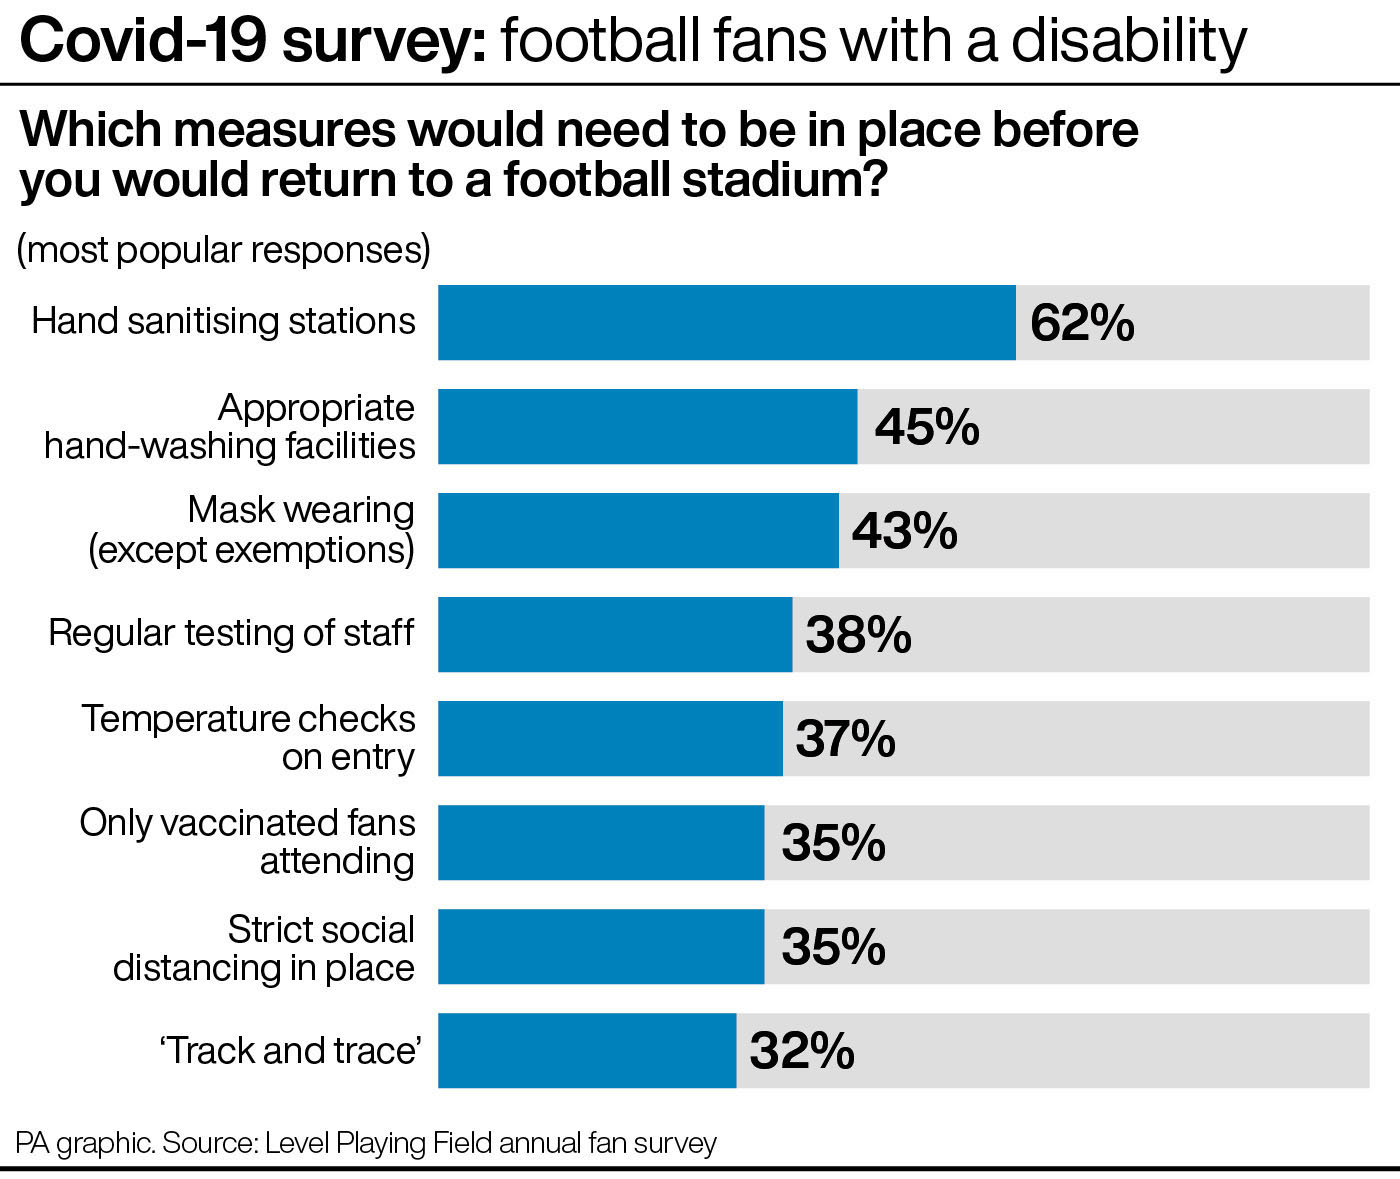 Covid-19 survey: football fans with a disability